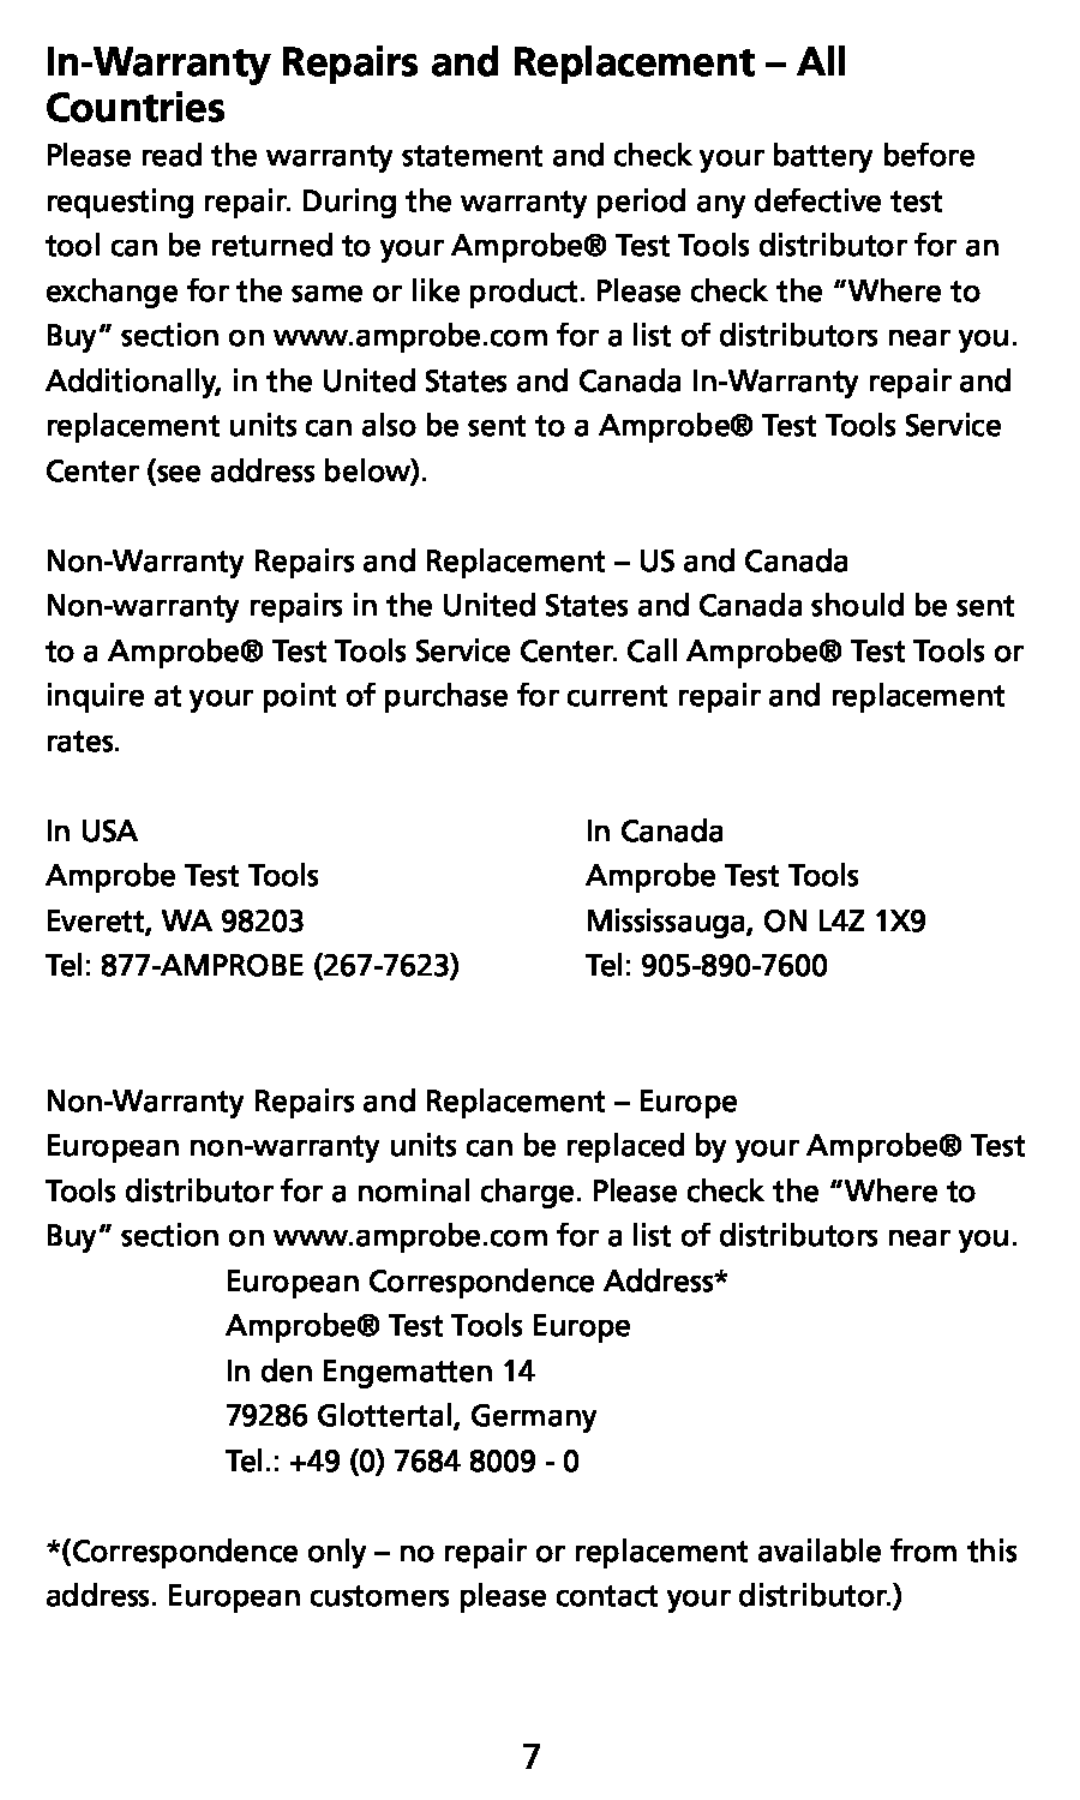 Ampro Corporation THWD-3, TH-3 user manual In-Warranty Repairs and Replacement - All Countries 